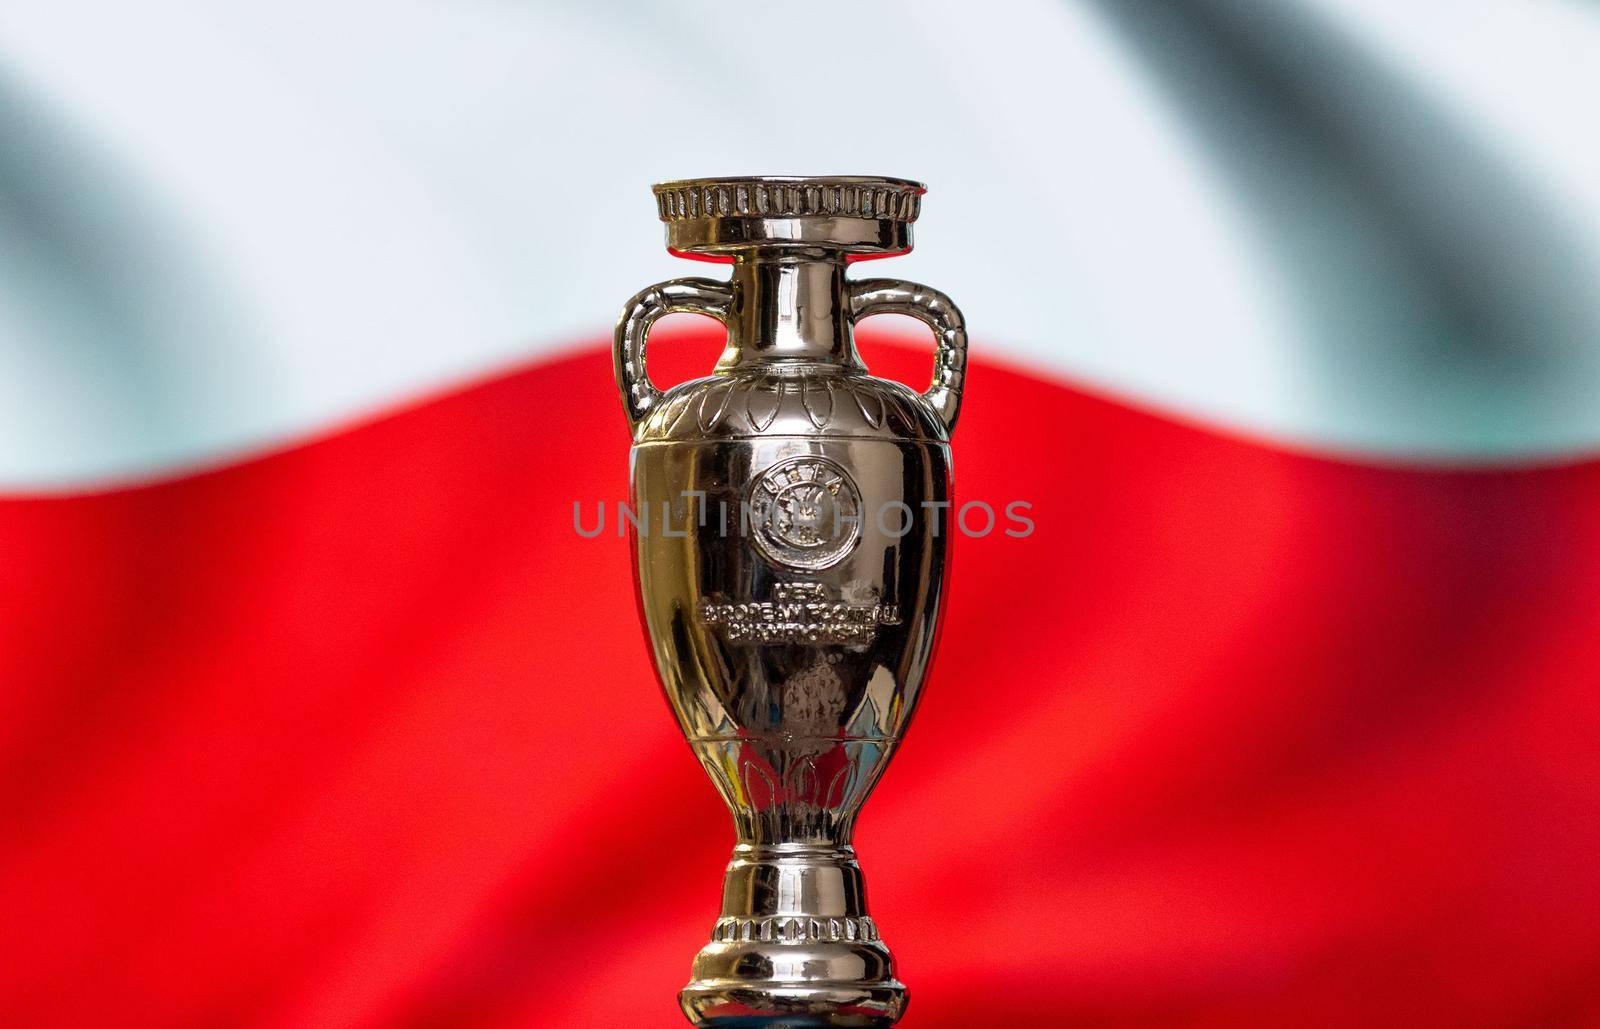 April 10, 2021. Warsaw, Poland. UEFA European Championship Cup against the background of the flag of Poland.